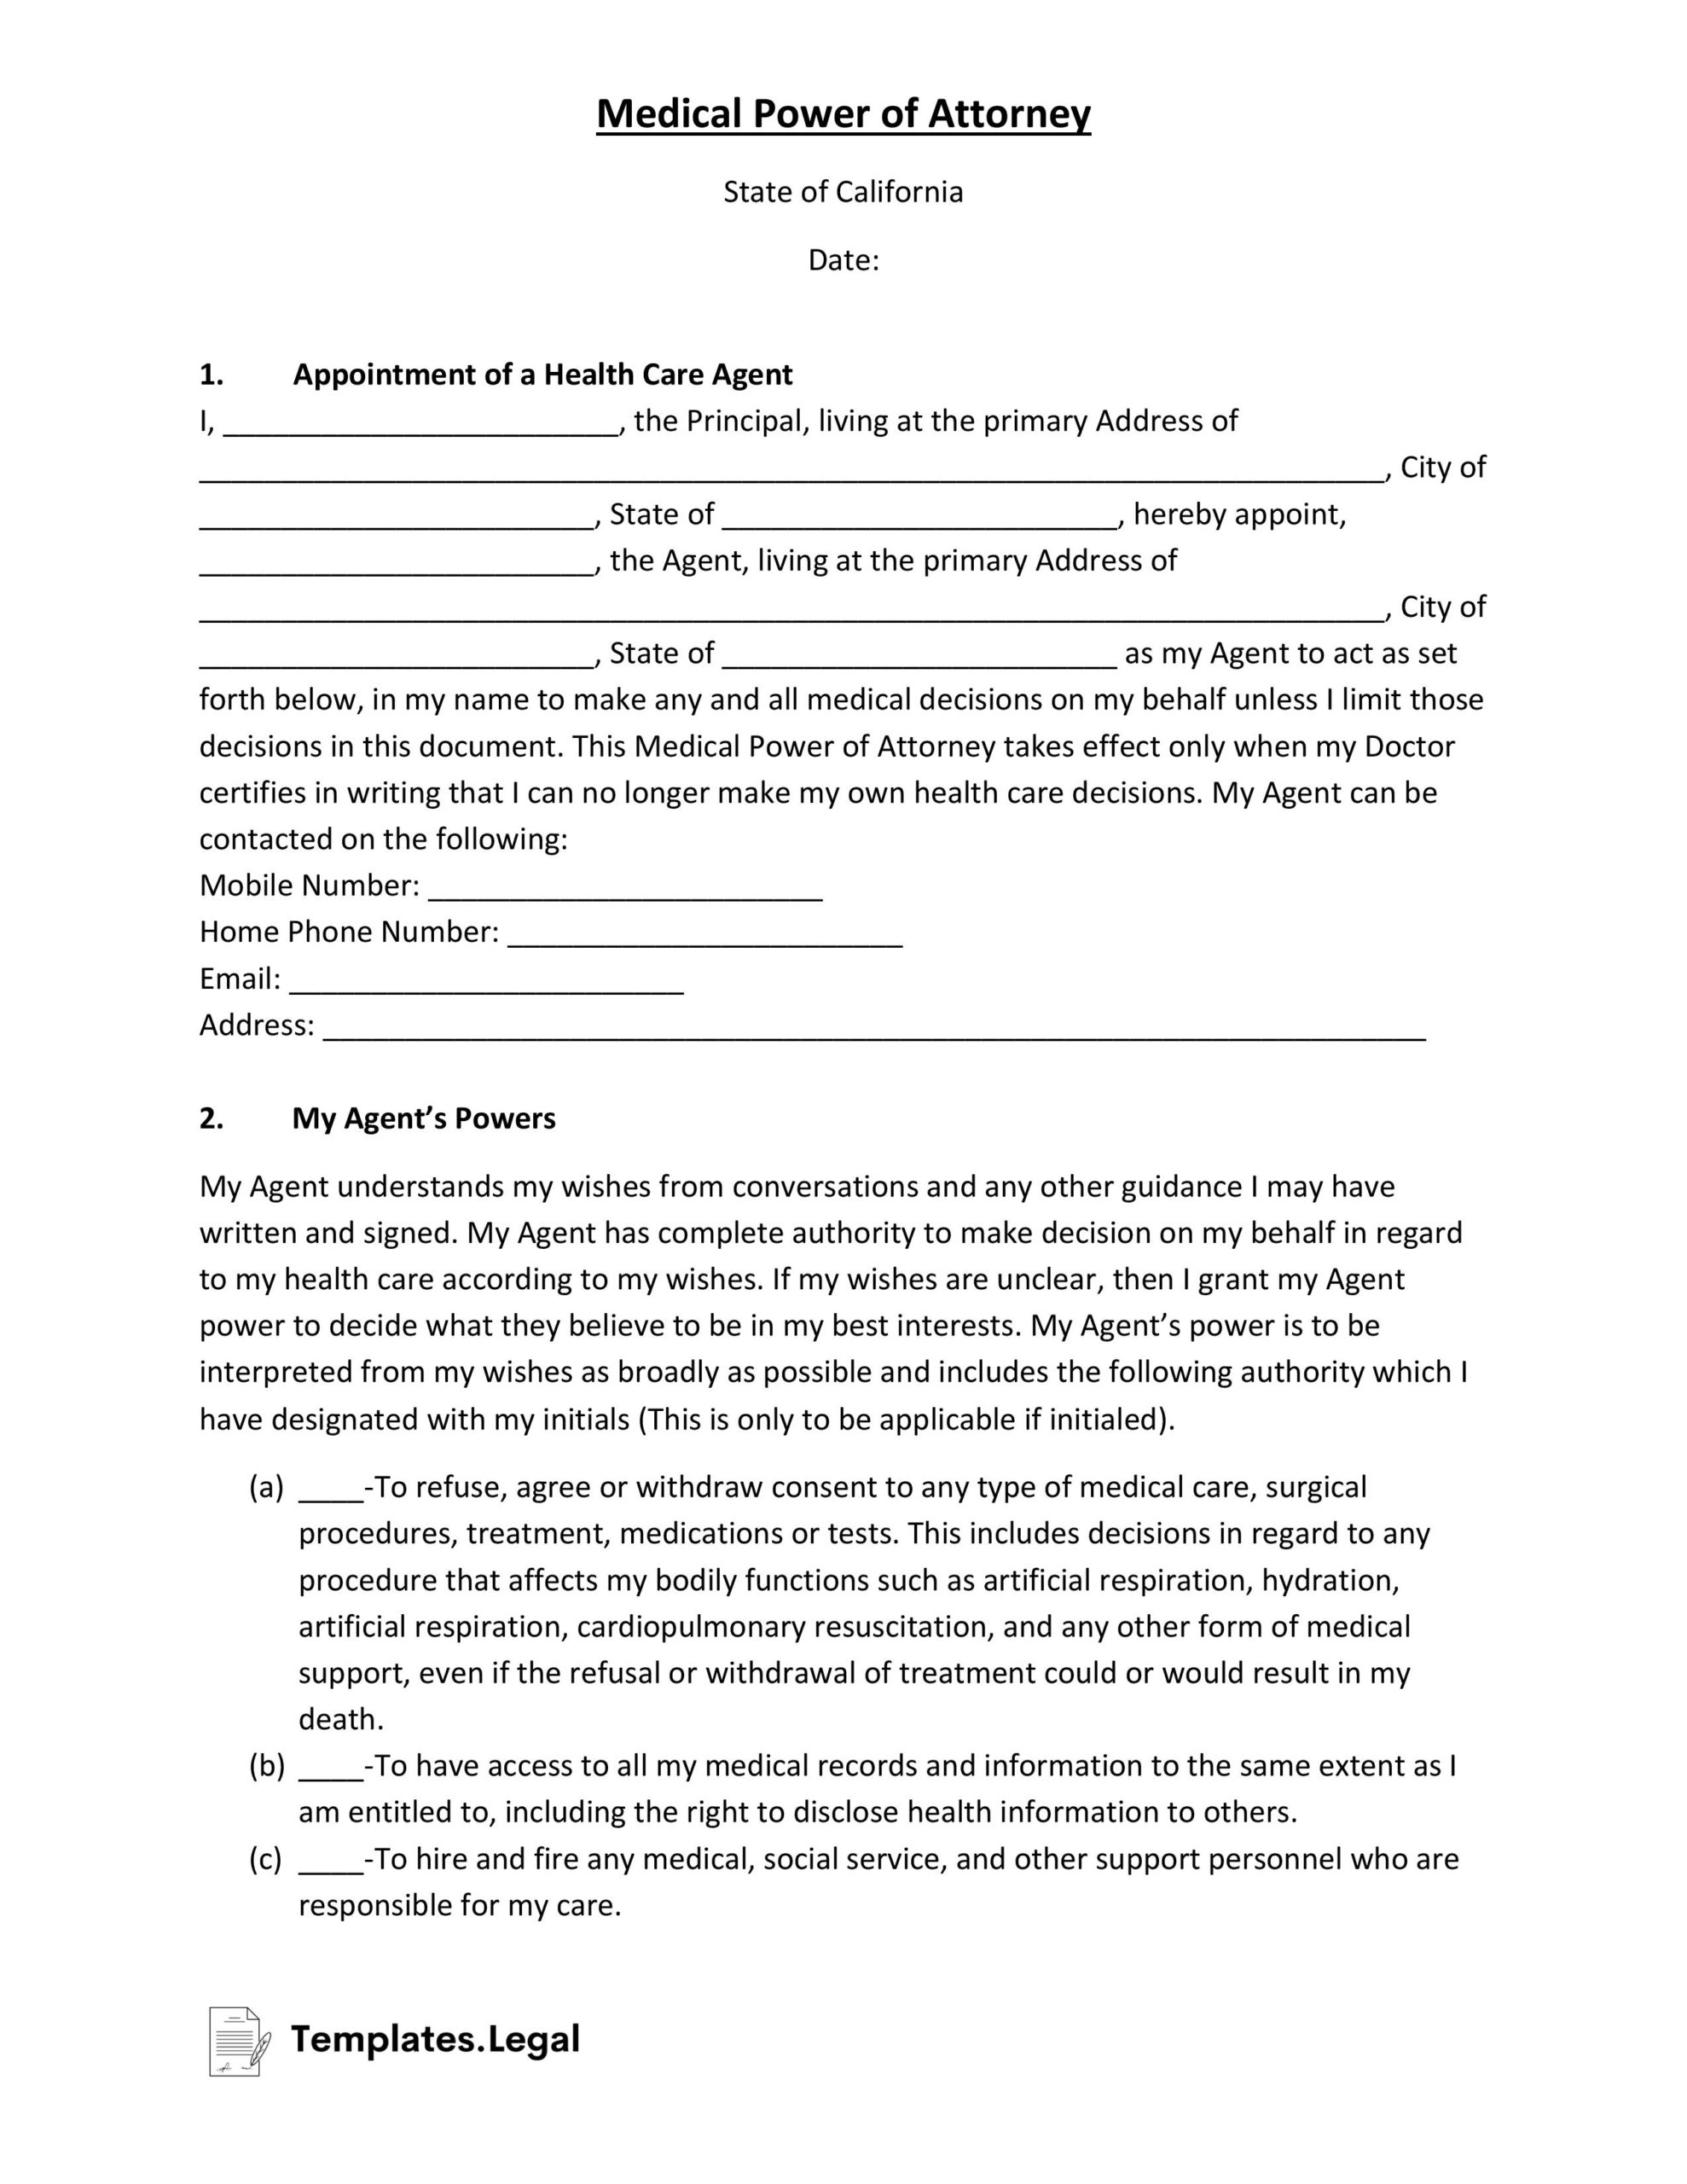 California Medical Power of Attorney- Templates.Legal